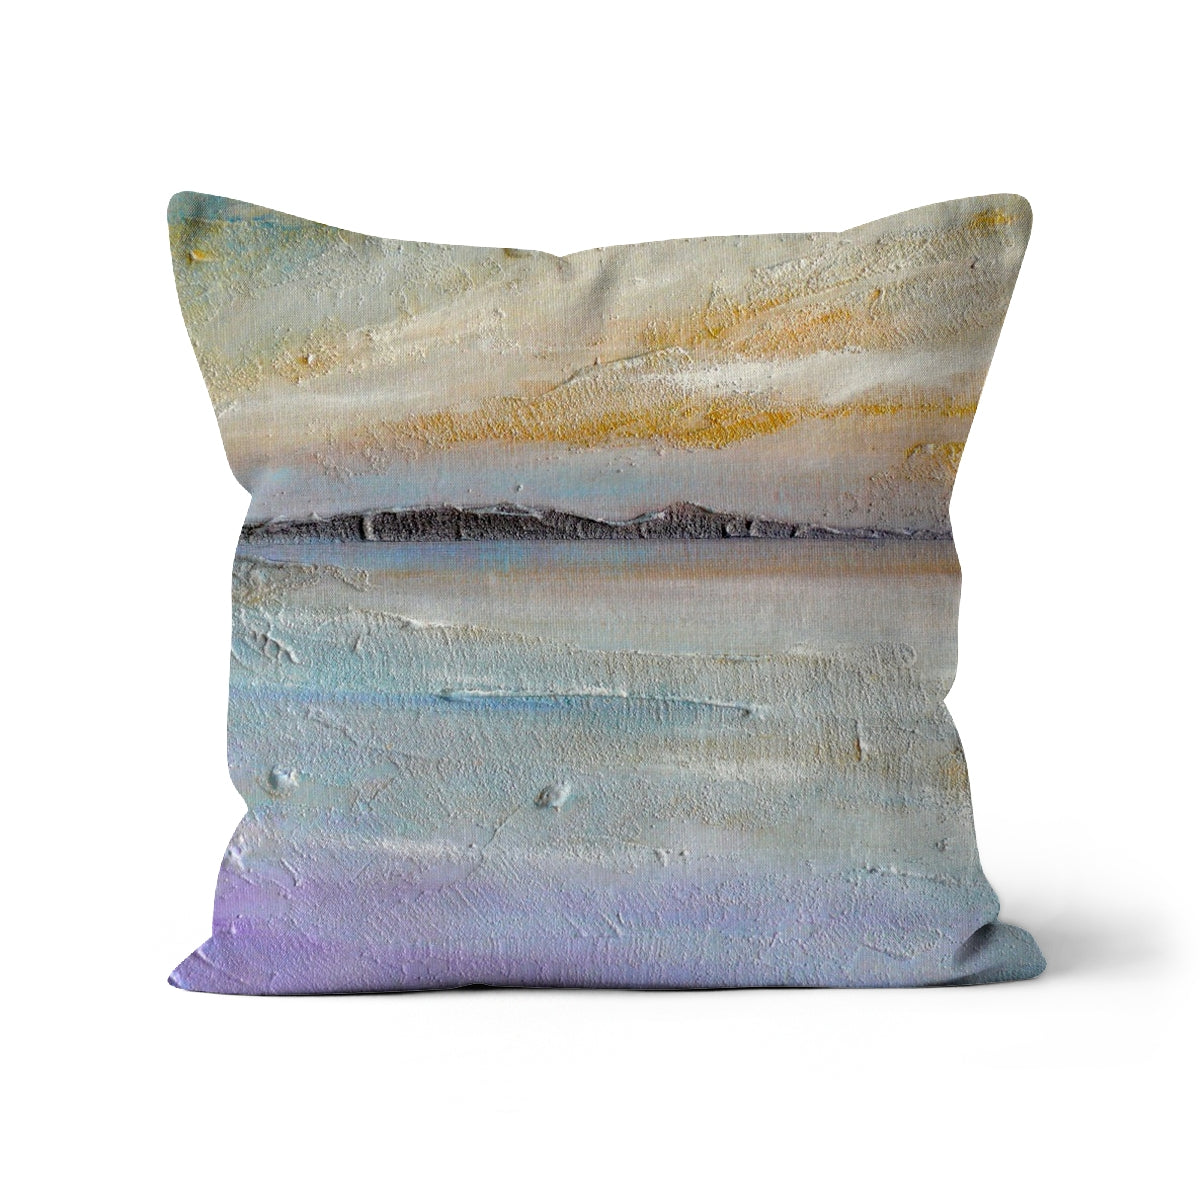 Sollas Beach South Uist Art Gifts Cushion-Cushions-Hebridean Islands Art Gallery-Canvas-16"x16"-Paintings, Prints, Homeware, Art Gifts From Scotland By Scottish Artist Kevin Hunter